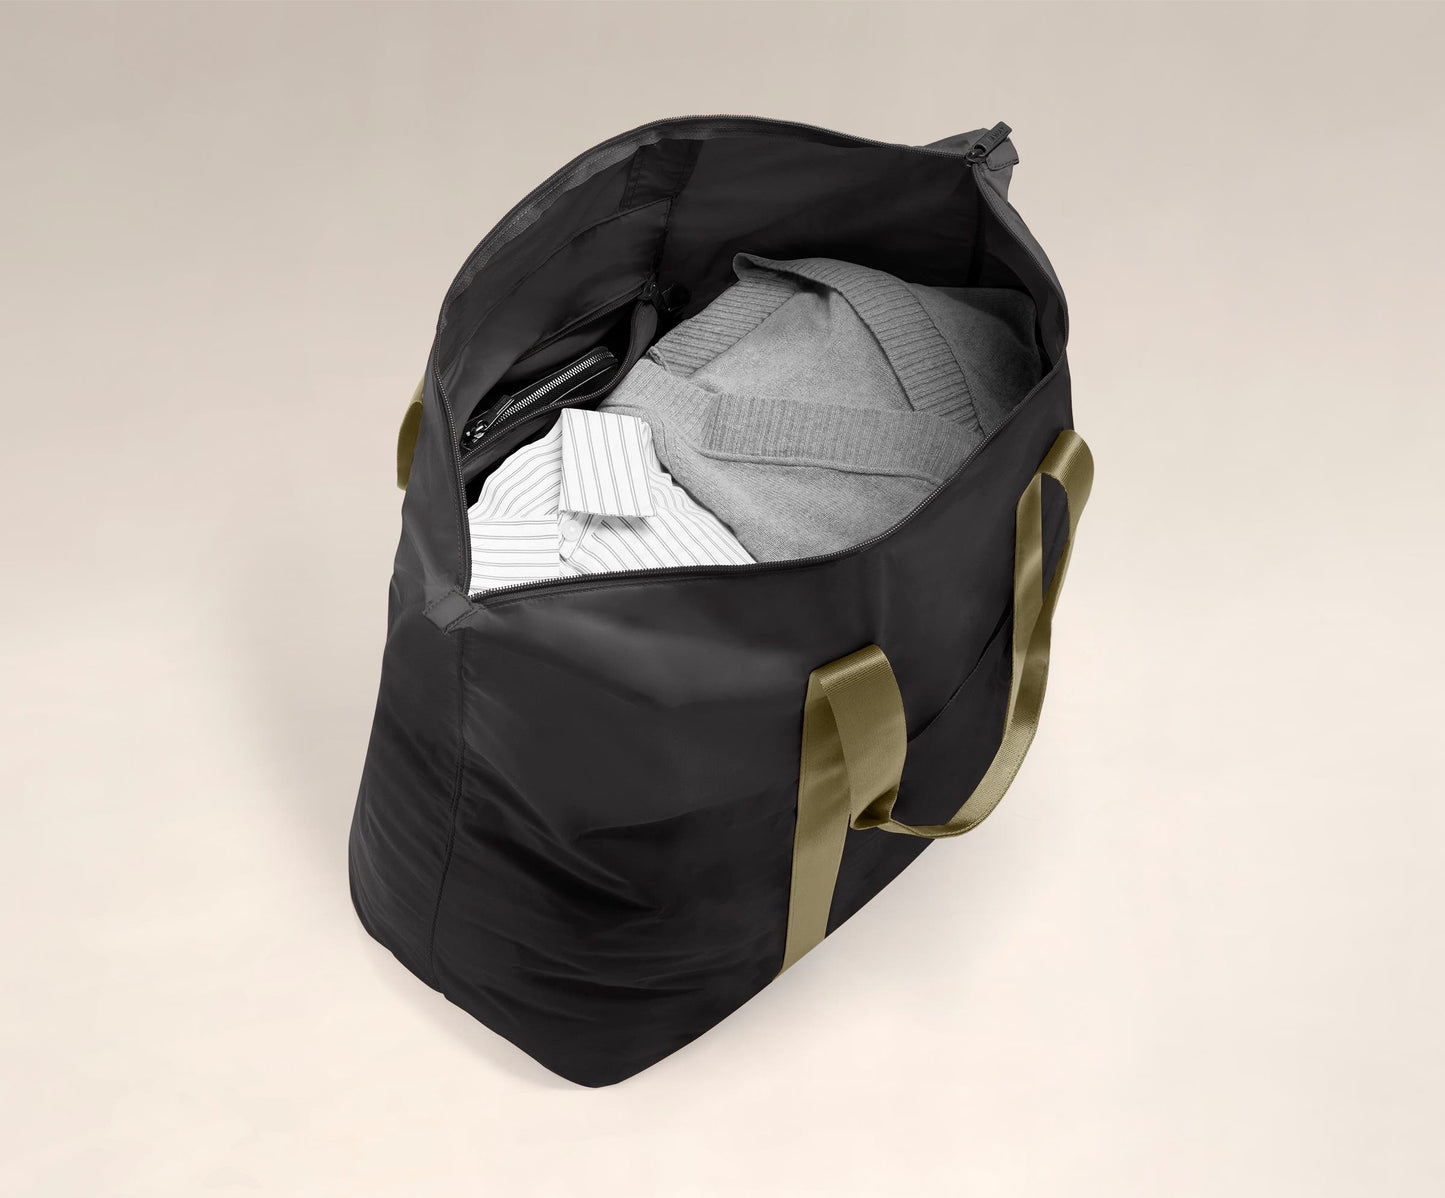 The Packable Carryall